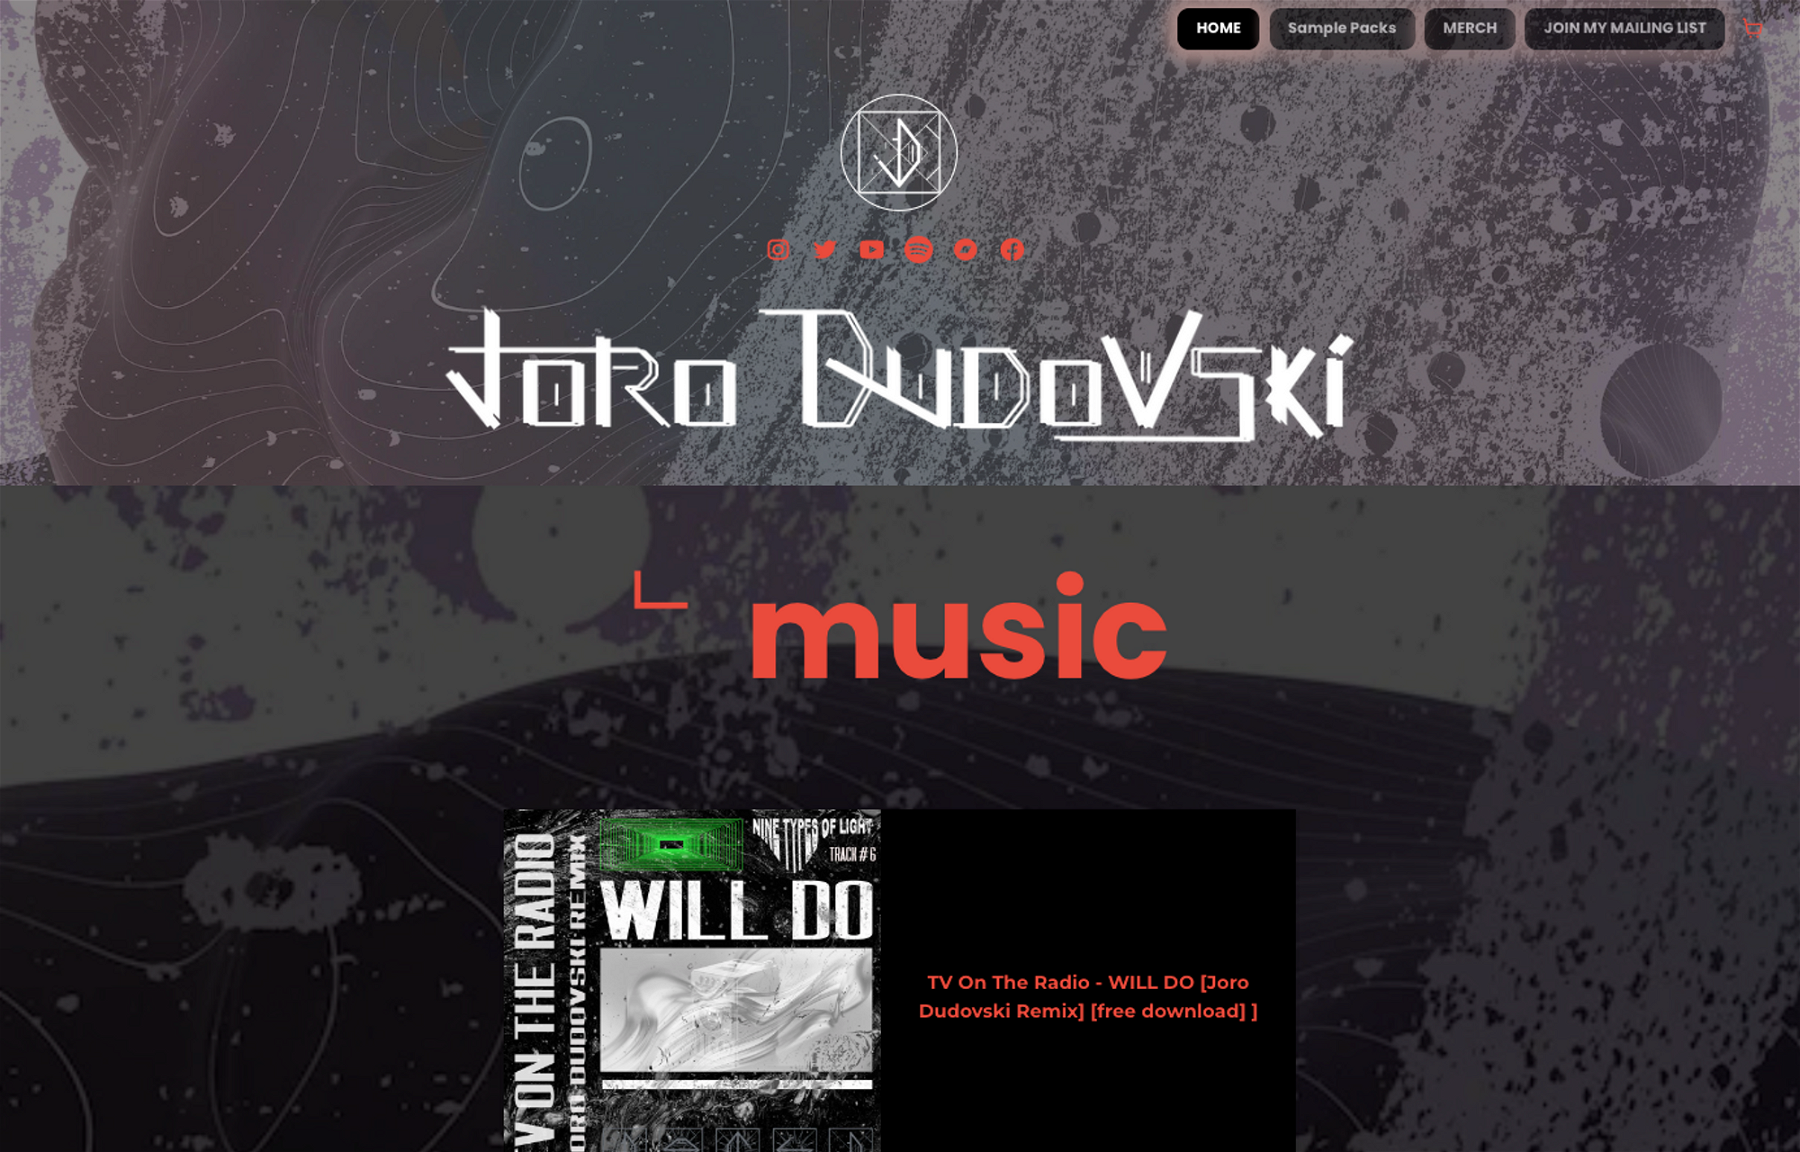 Why Joro Dudovski Uses Jemi To Promote His Music & Sell Digital Products